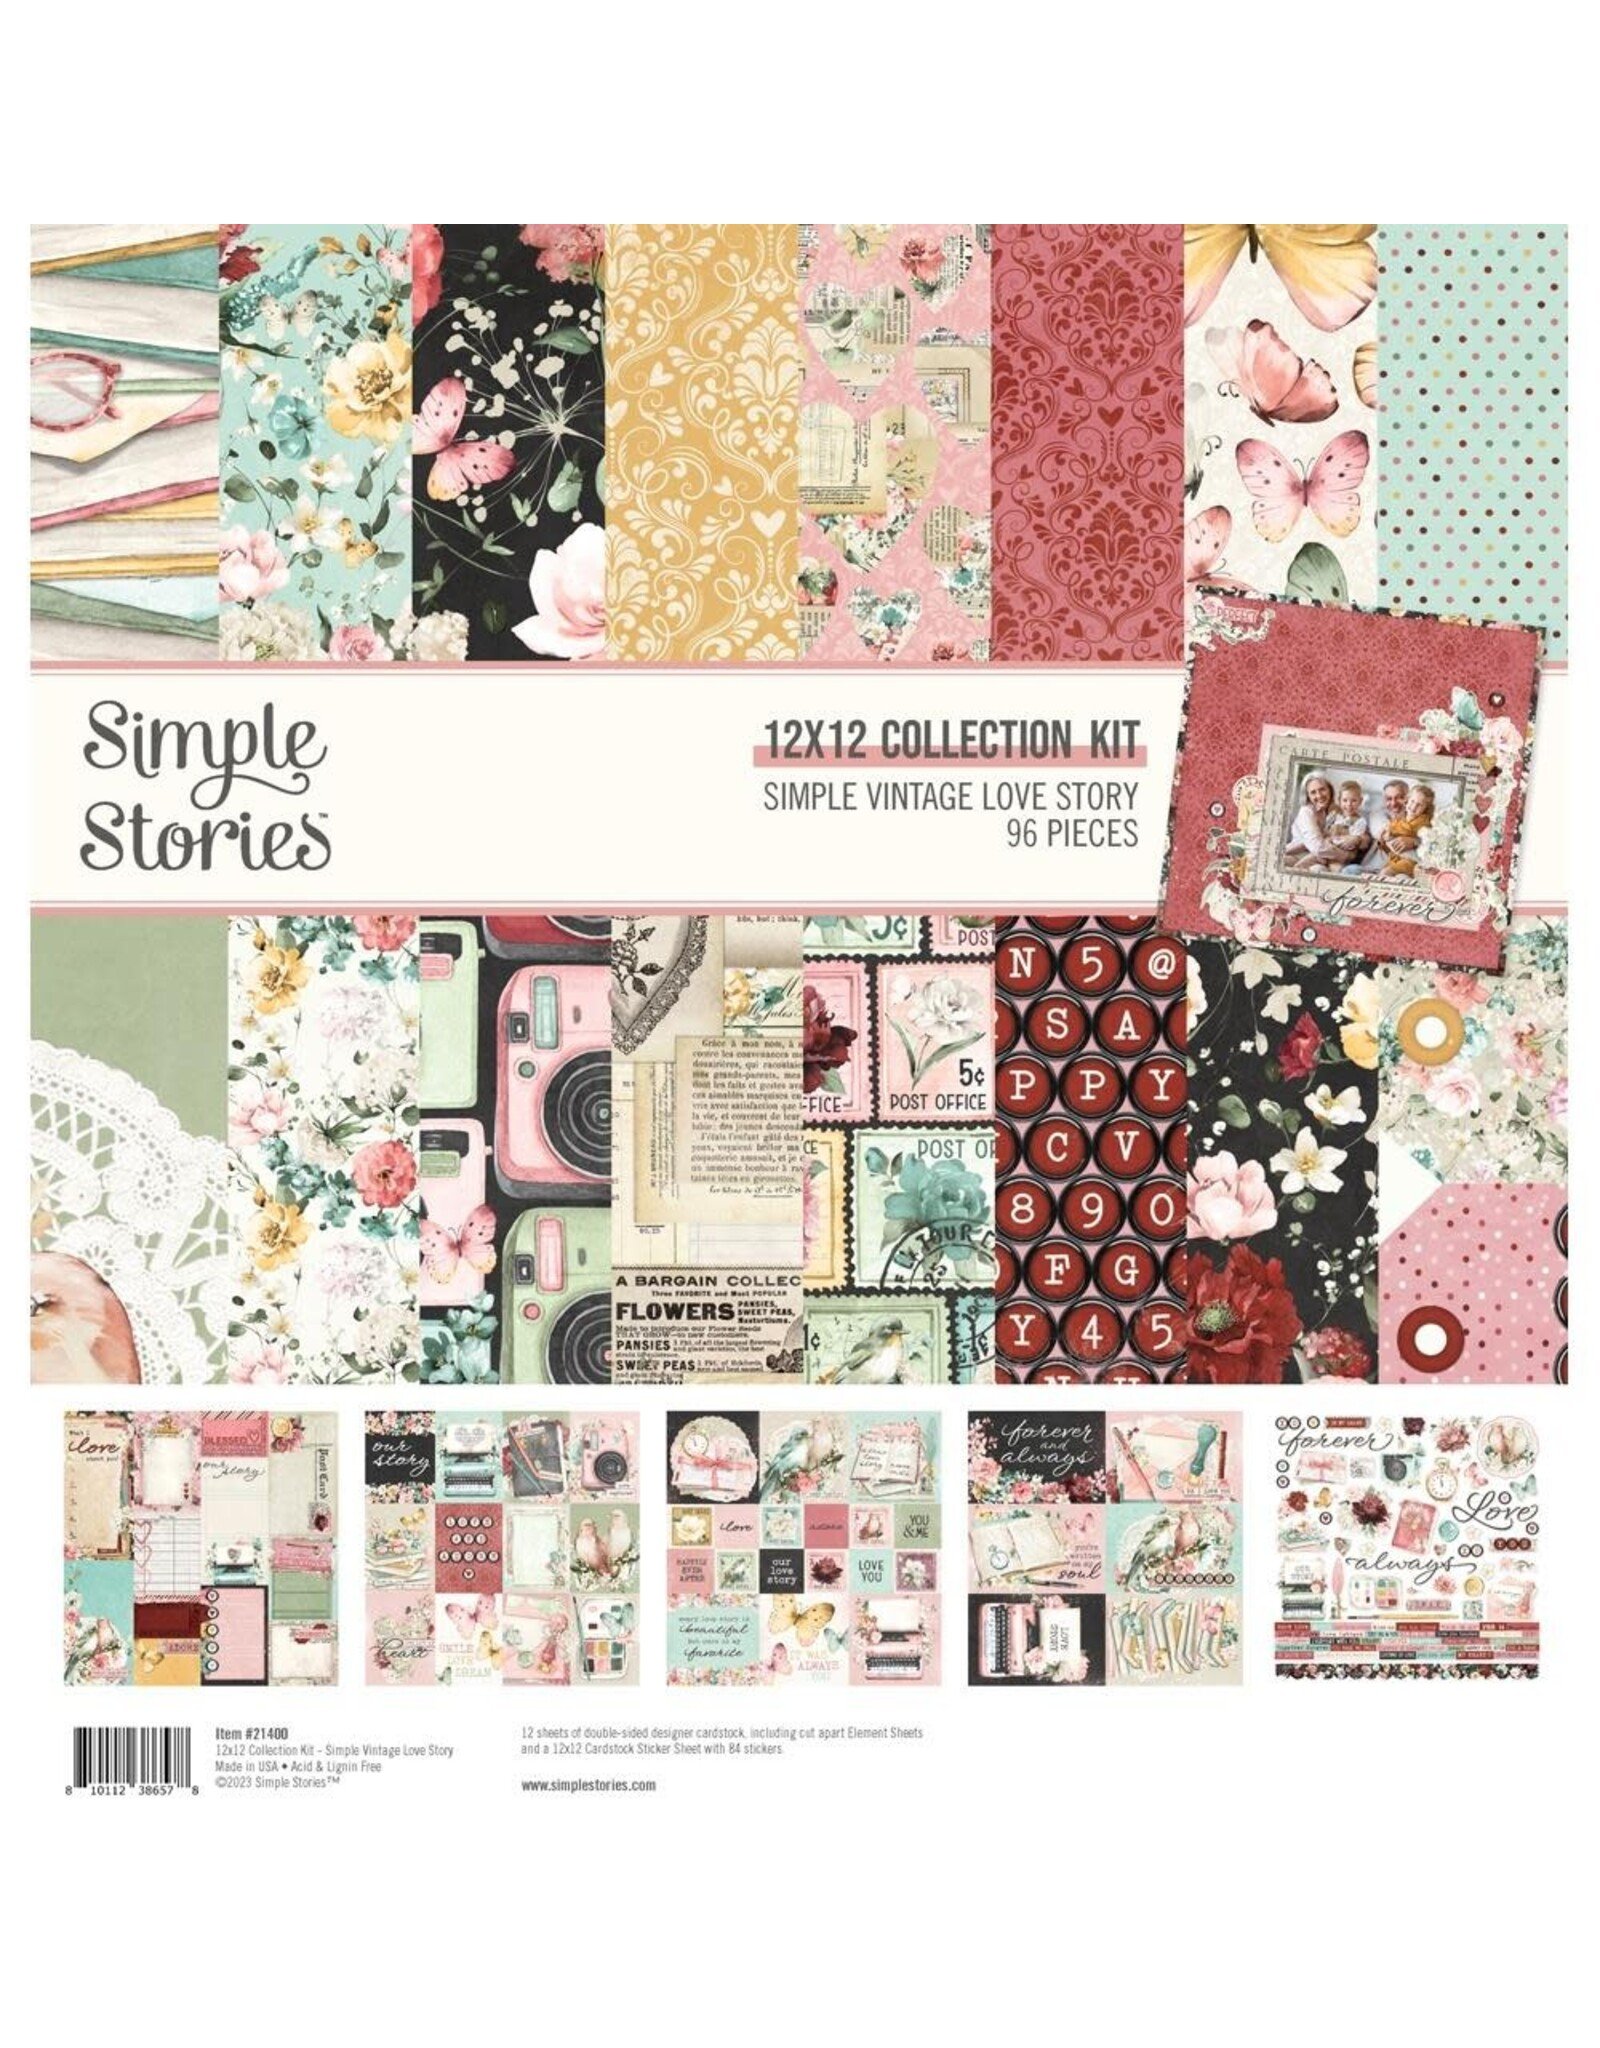 SIMPLE STORIES SIMPLE STORIES SIMPLE VINTAGE LOVE STORY 12x12 COLLECTION KIT